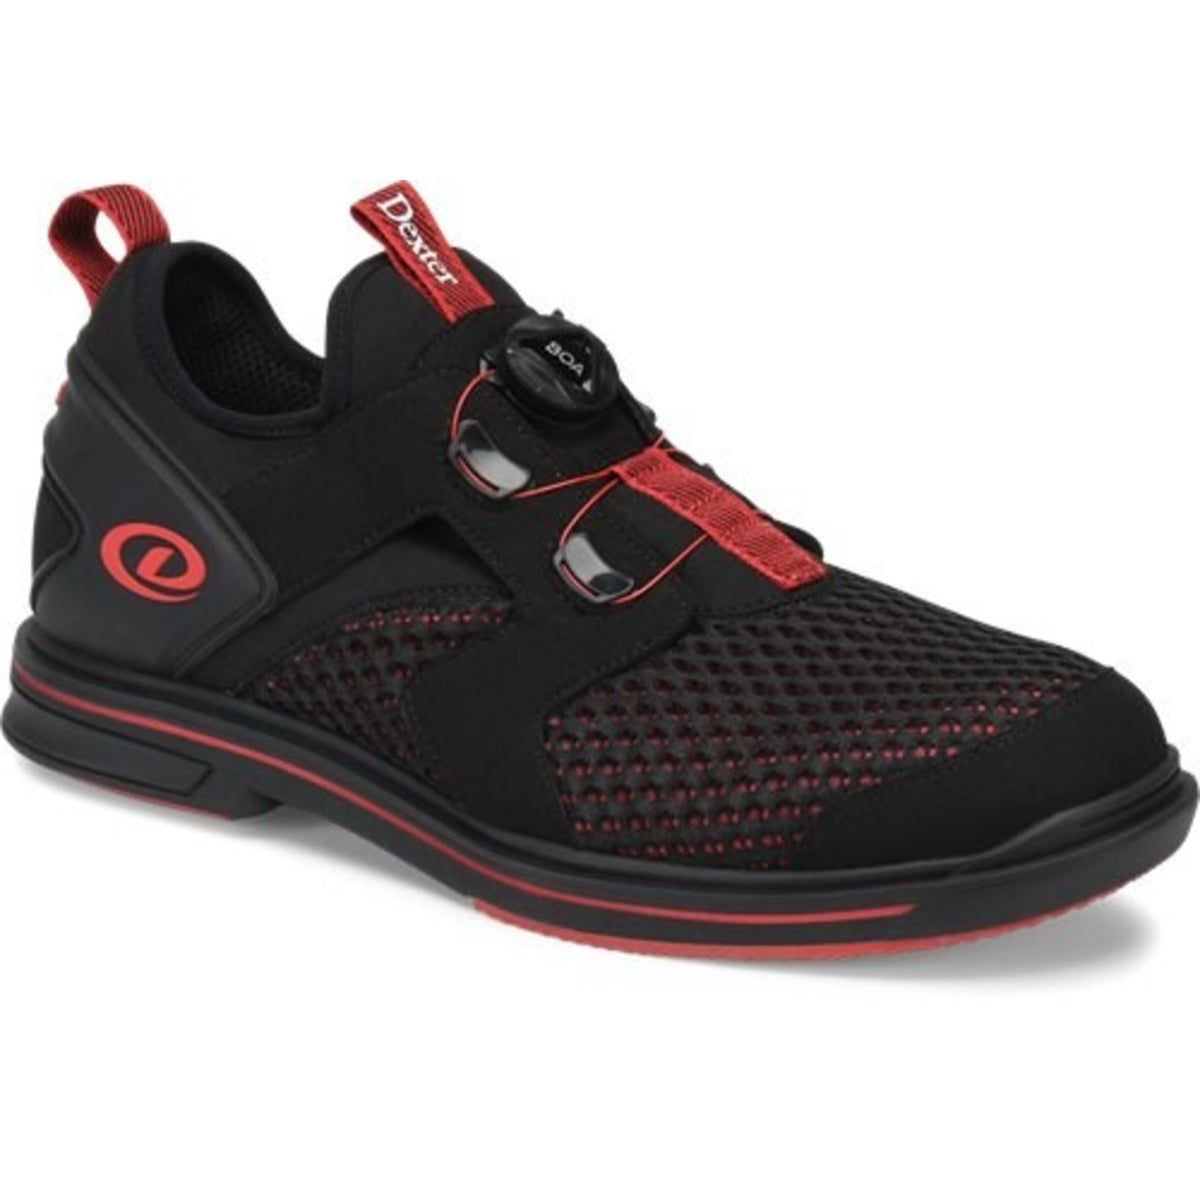 Pro Boa Black/Red Shoes